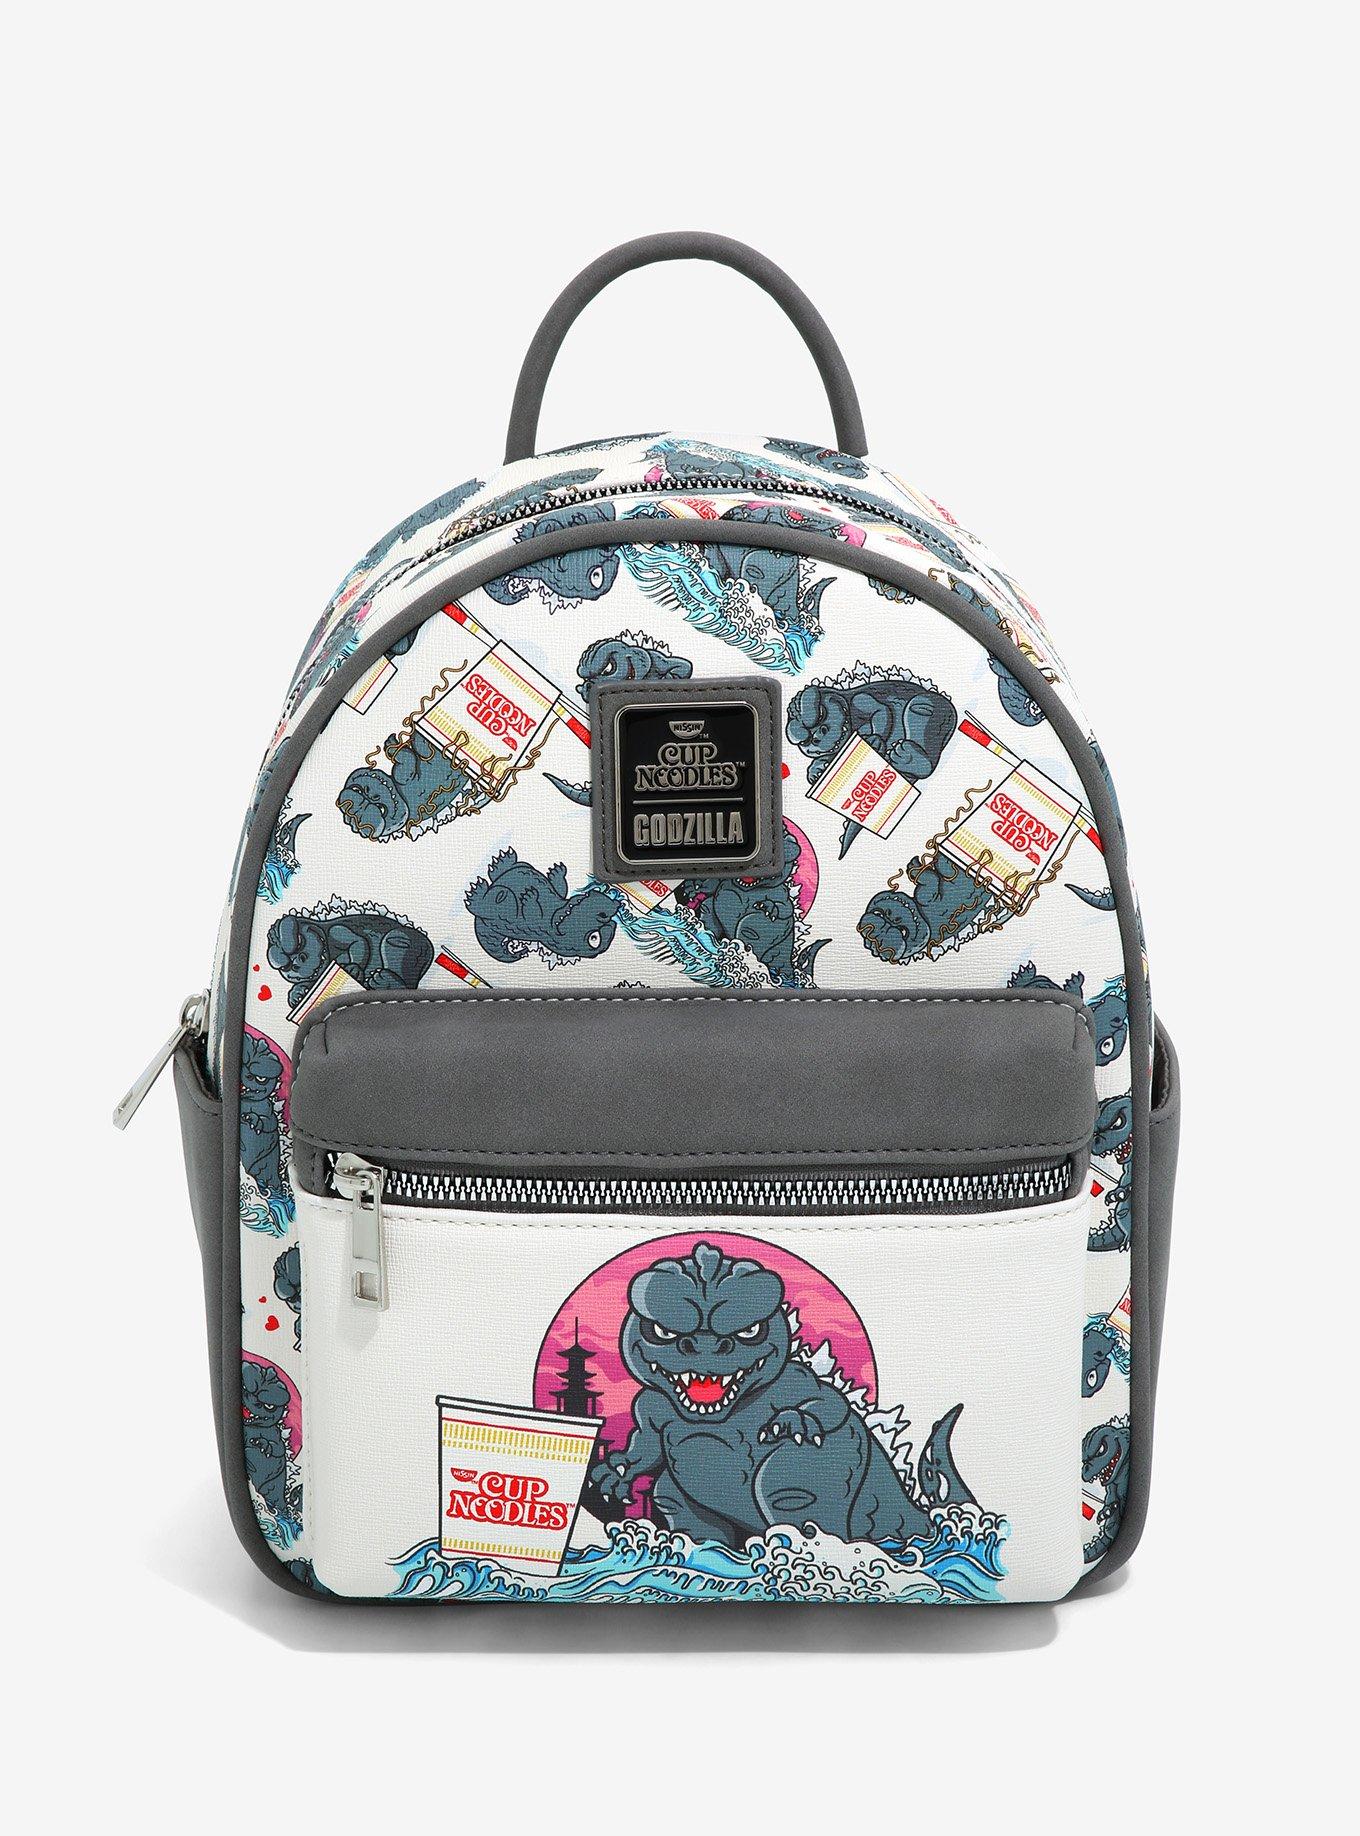 Nissin x Godzilla Cup Noodles Mini Backpack - BoxLunch Exclusive